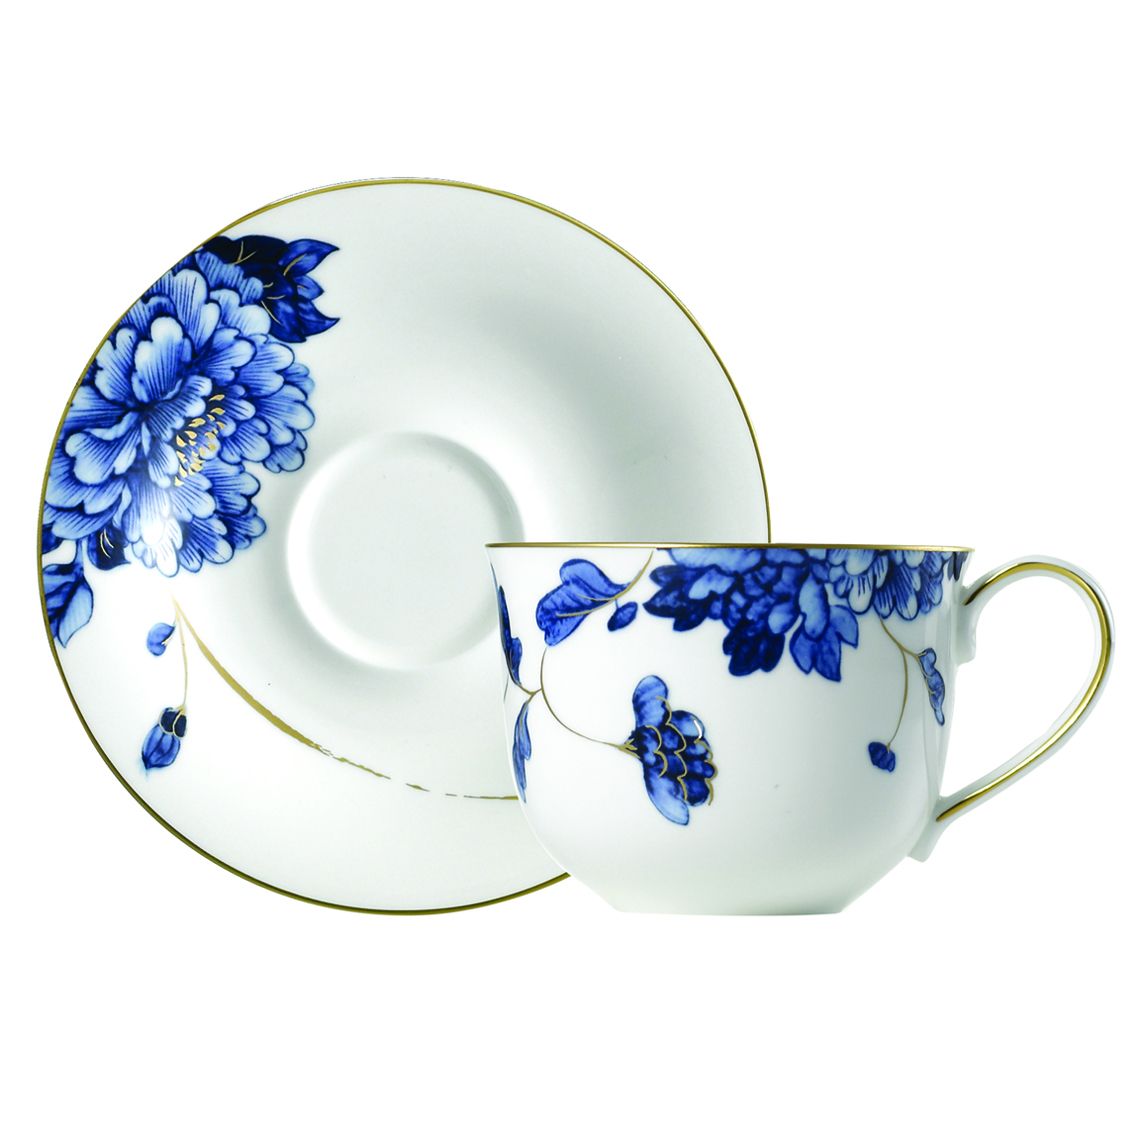 EMPEROR FLOWER CUP AND SAUCER